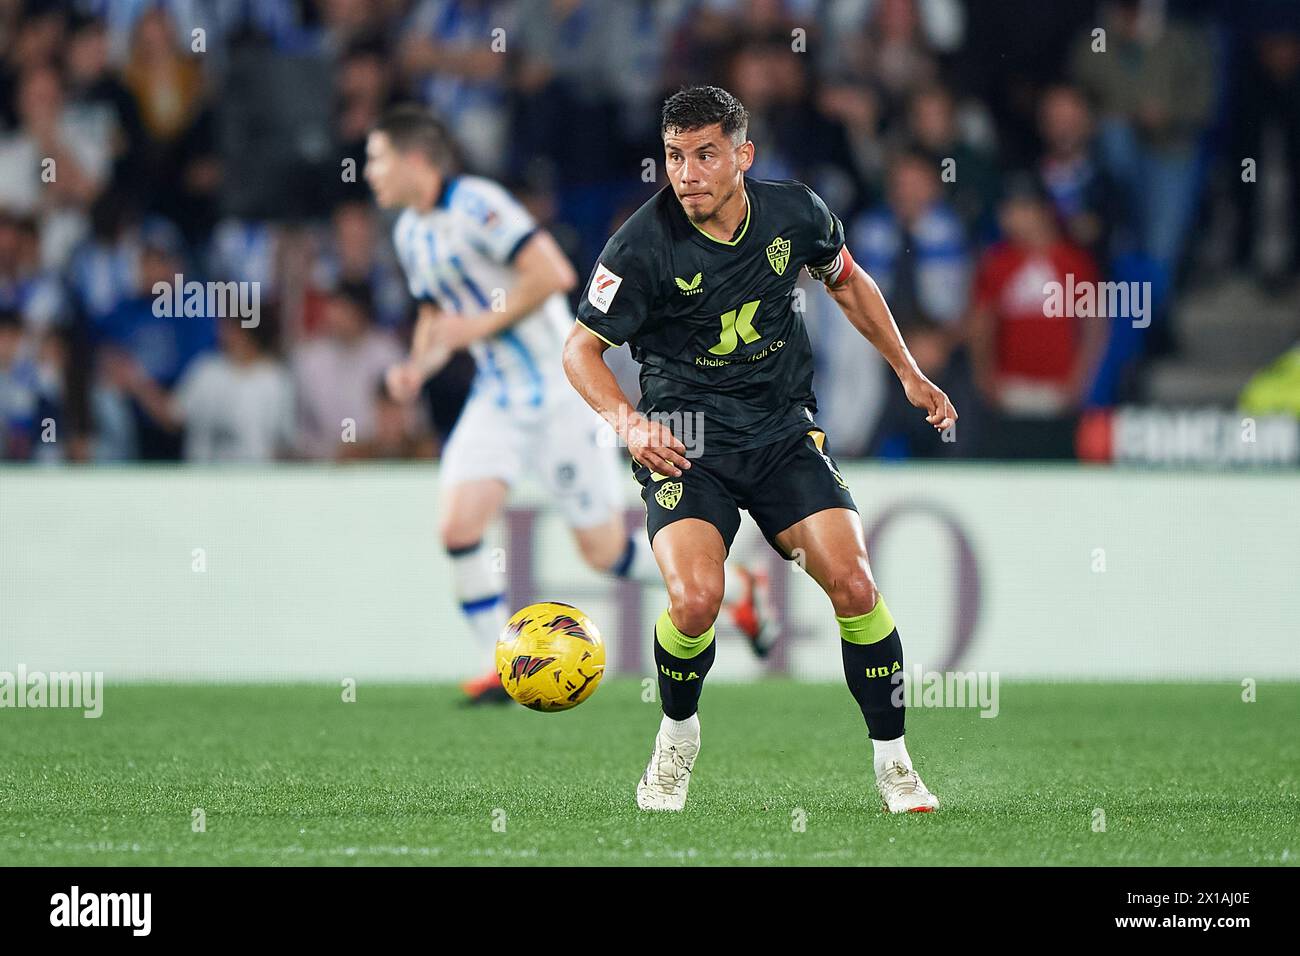 Lucas Robertone of UD Almeria with the ball during the LaLiga EA Sports match between Real Sociedad and UD Almeria at Reale Arnea Stadium on April 14, Stock Photo